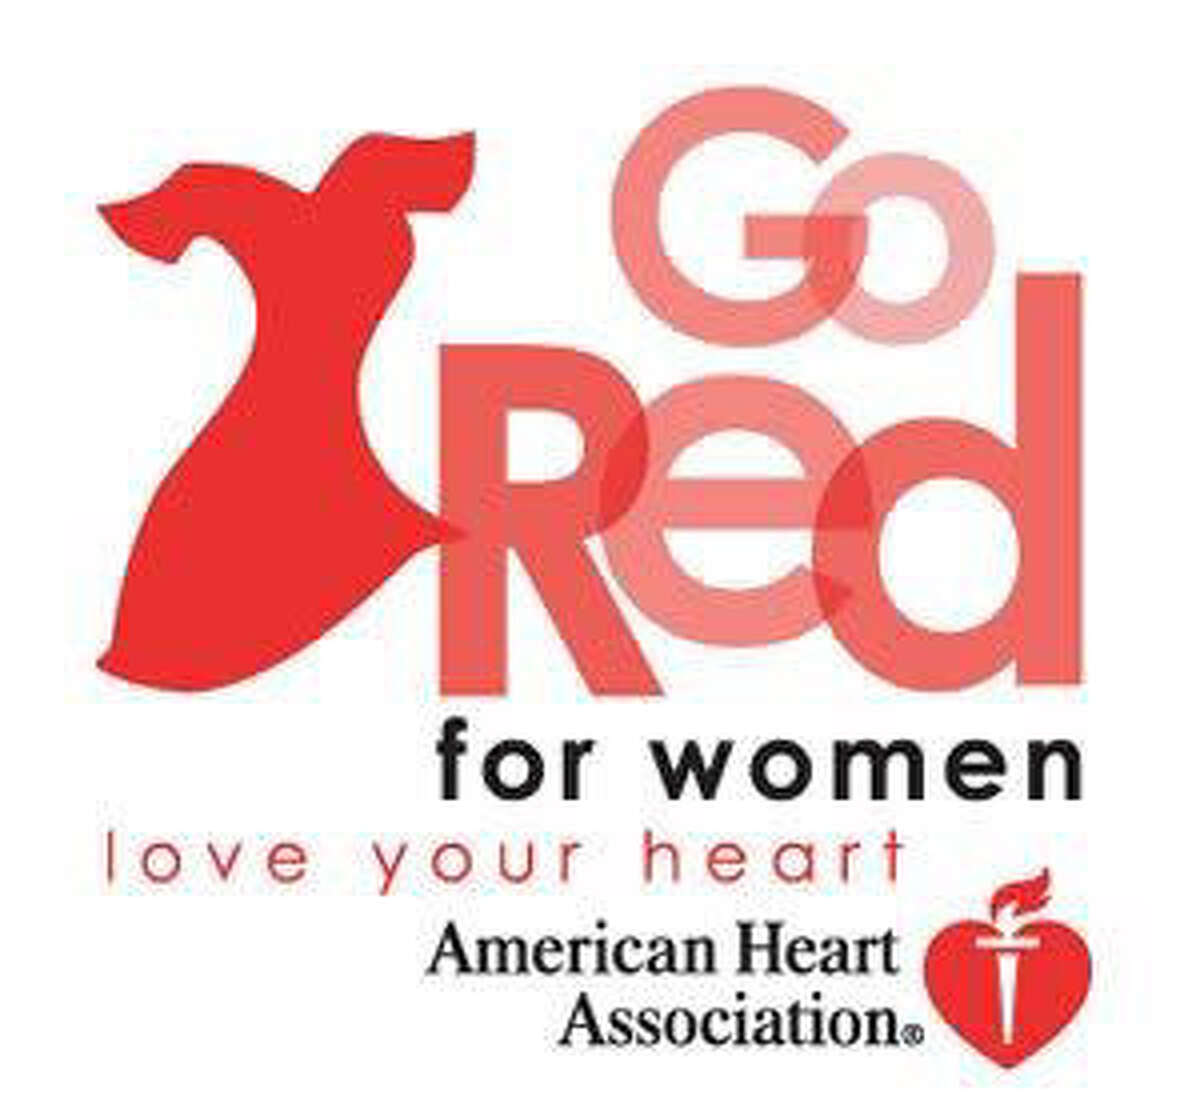 Go Red For Women launches Friday